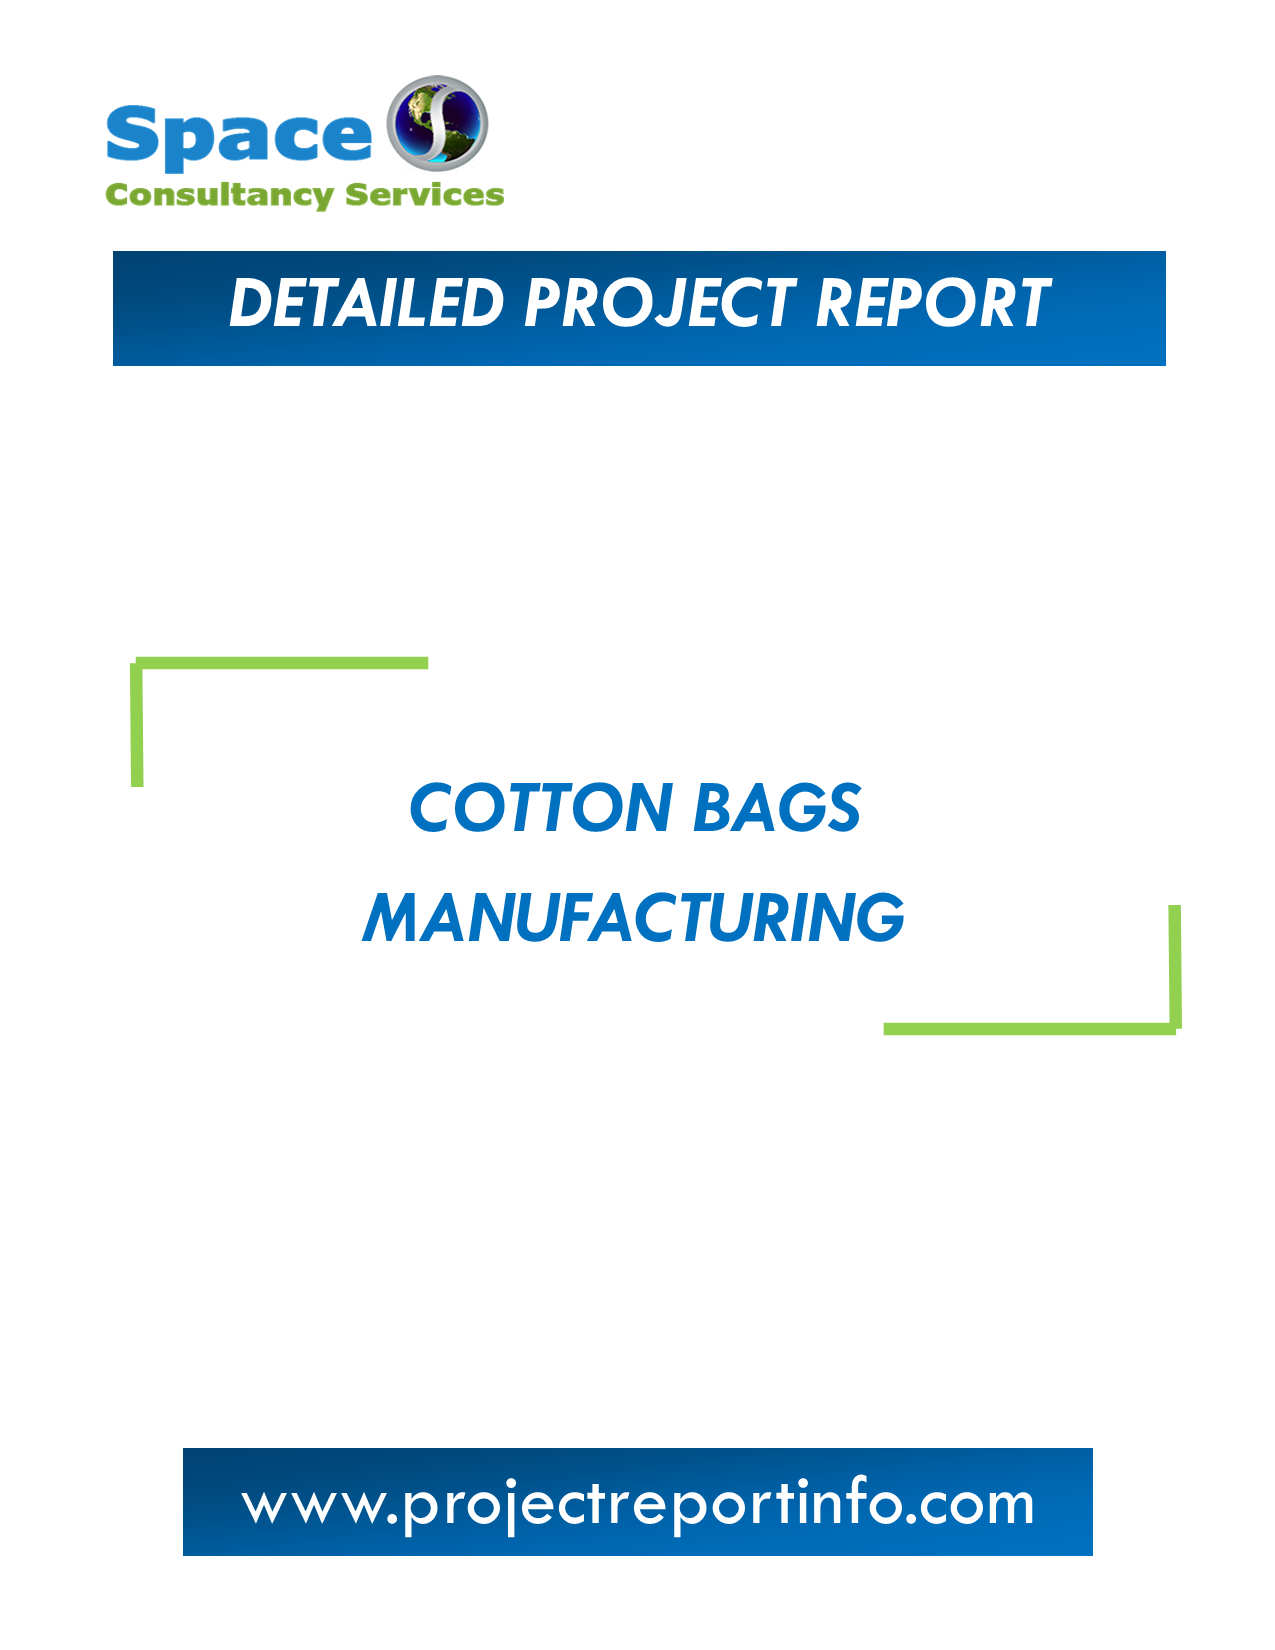 Project Report on Cotton Bags Manufacturing